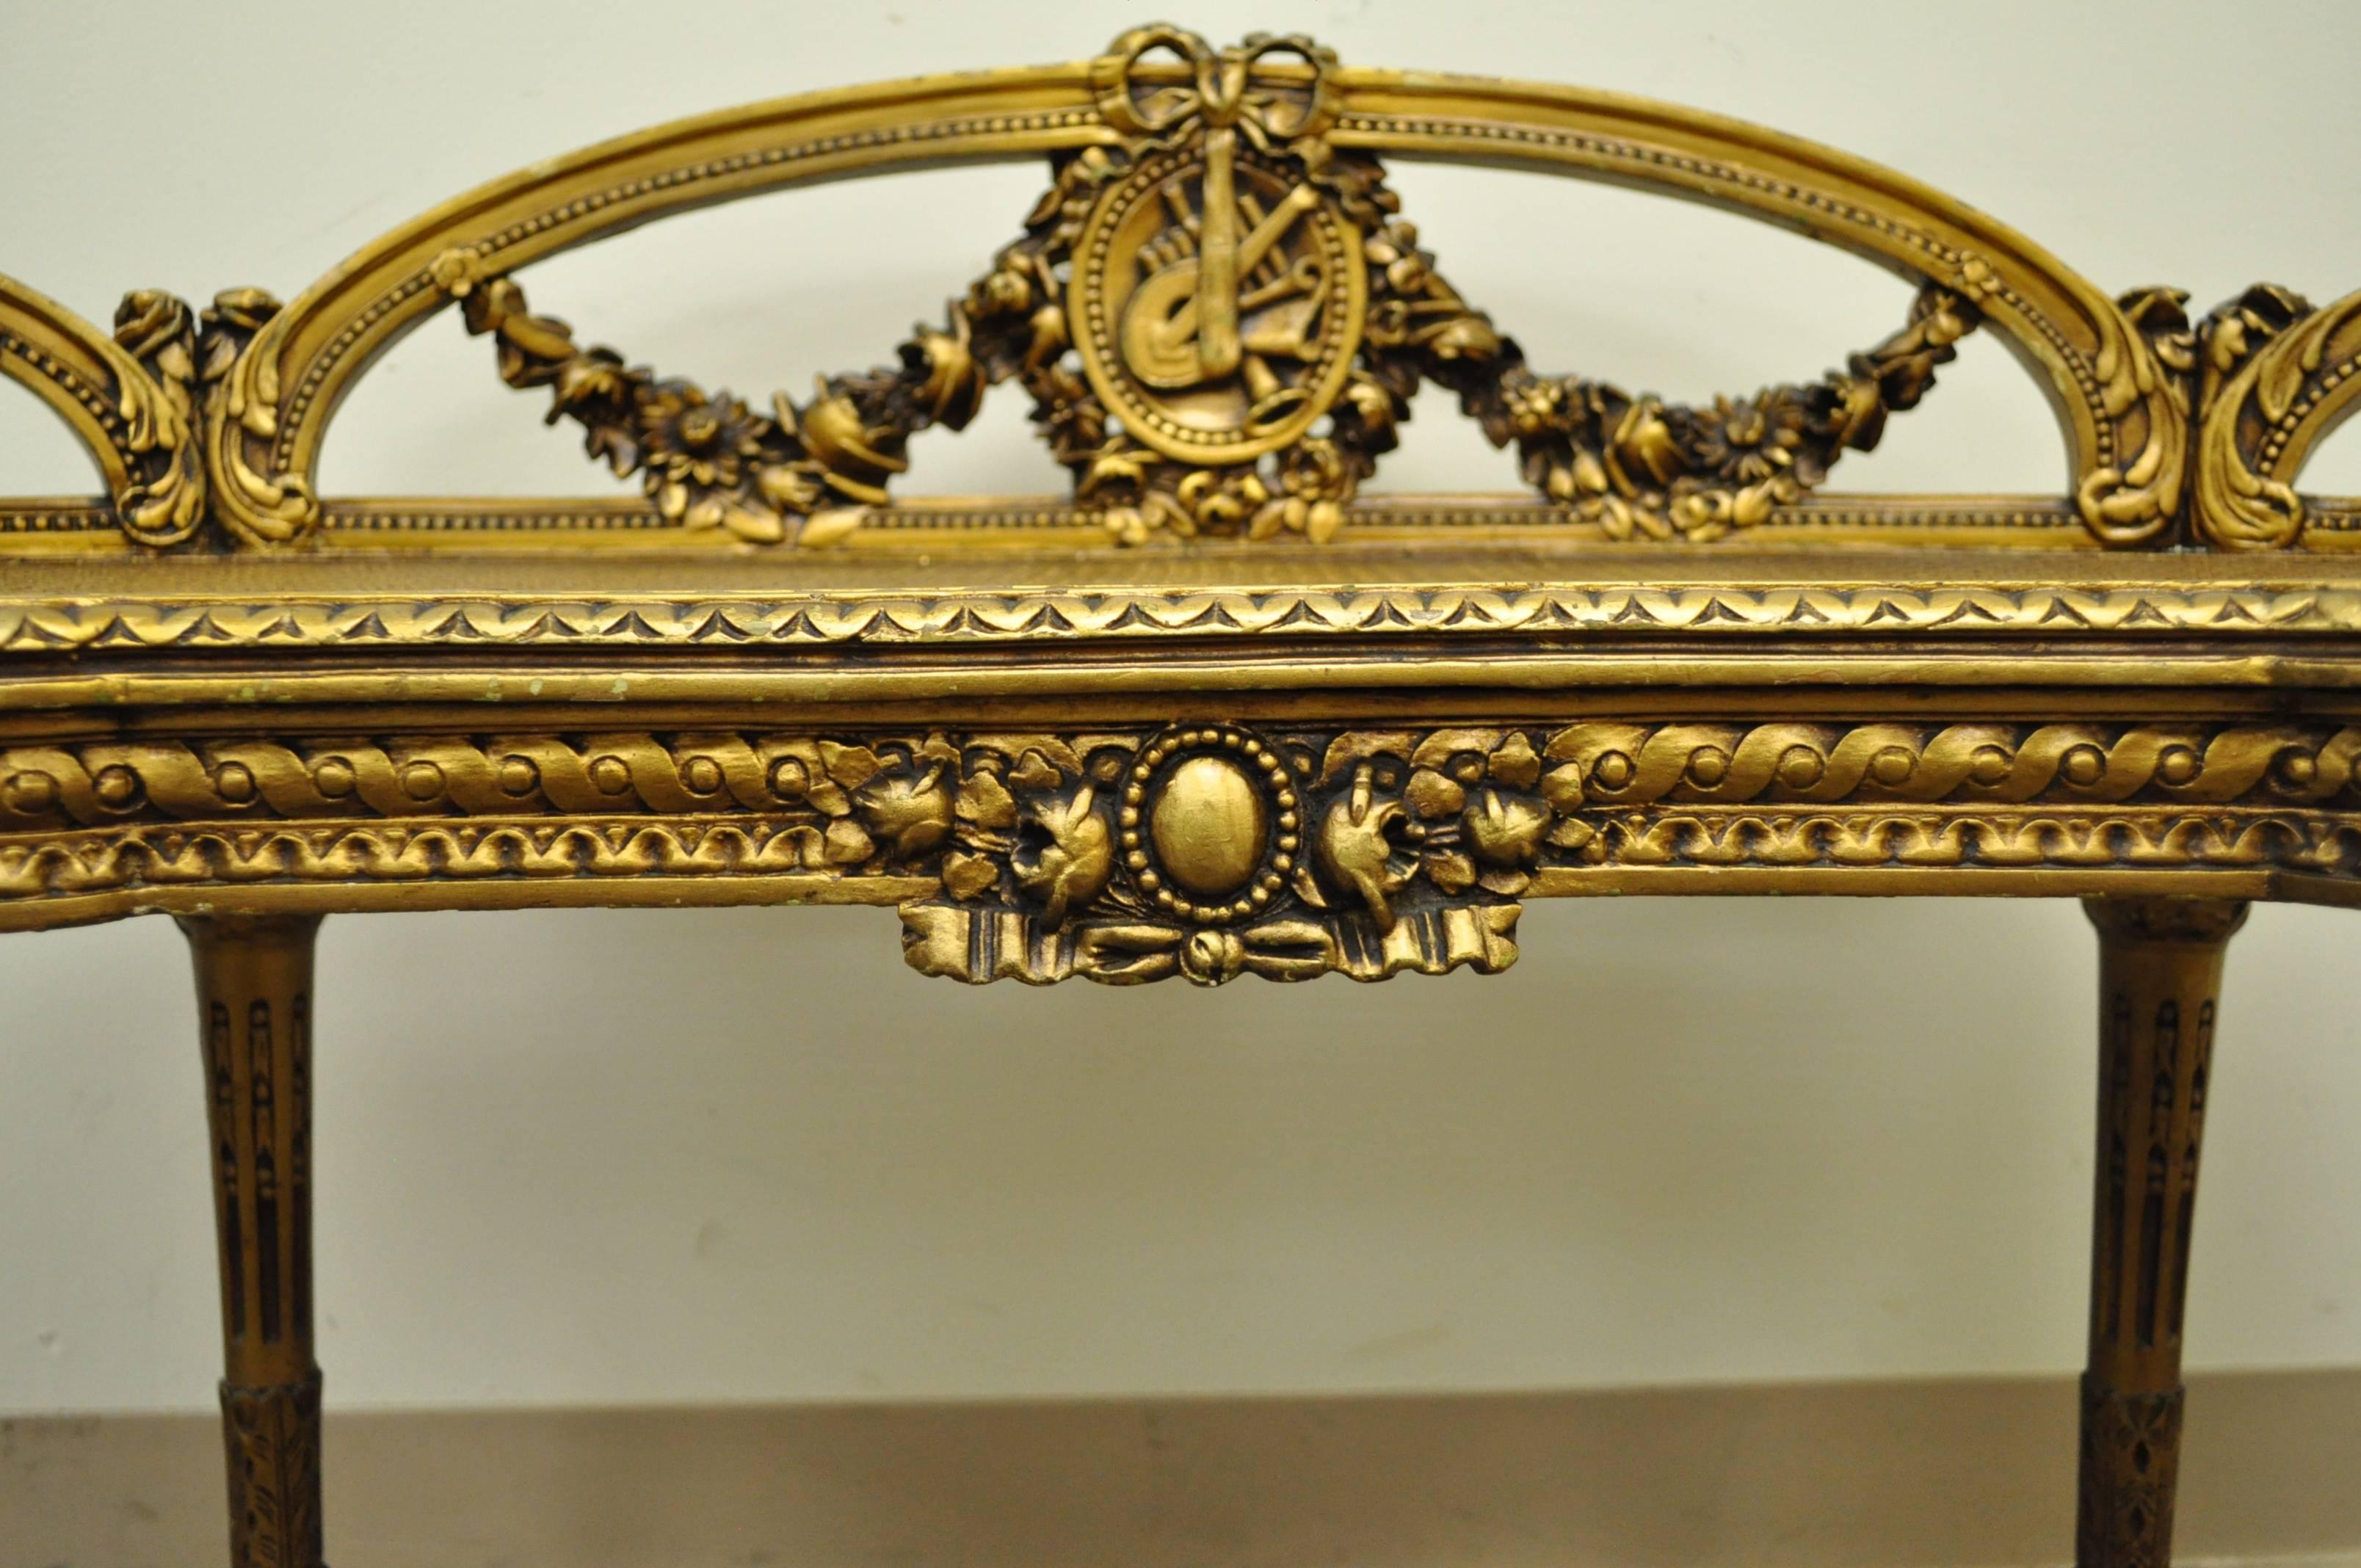 Beautifully carved, giltwood and gesso French vanity bench in the Louis XVI / Victorian taste, circa early 20th century. This wonderful item features a kidney shaped solid wood frame, carved as well as applied detailing including floral drapes, and